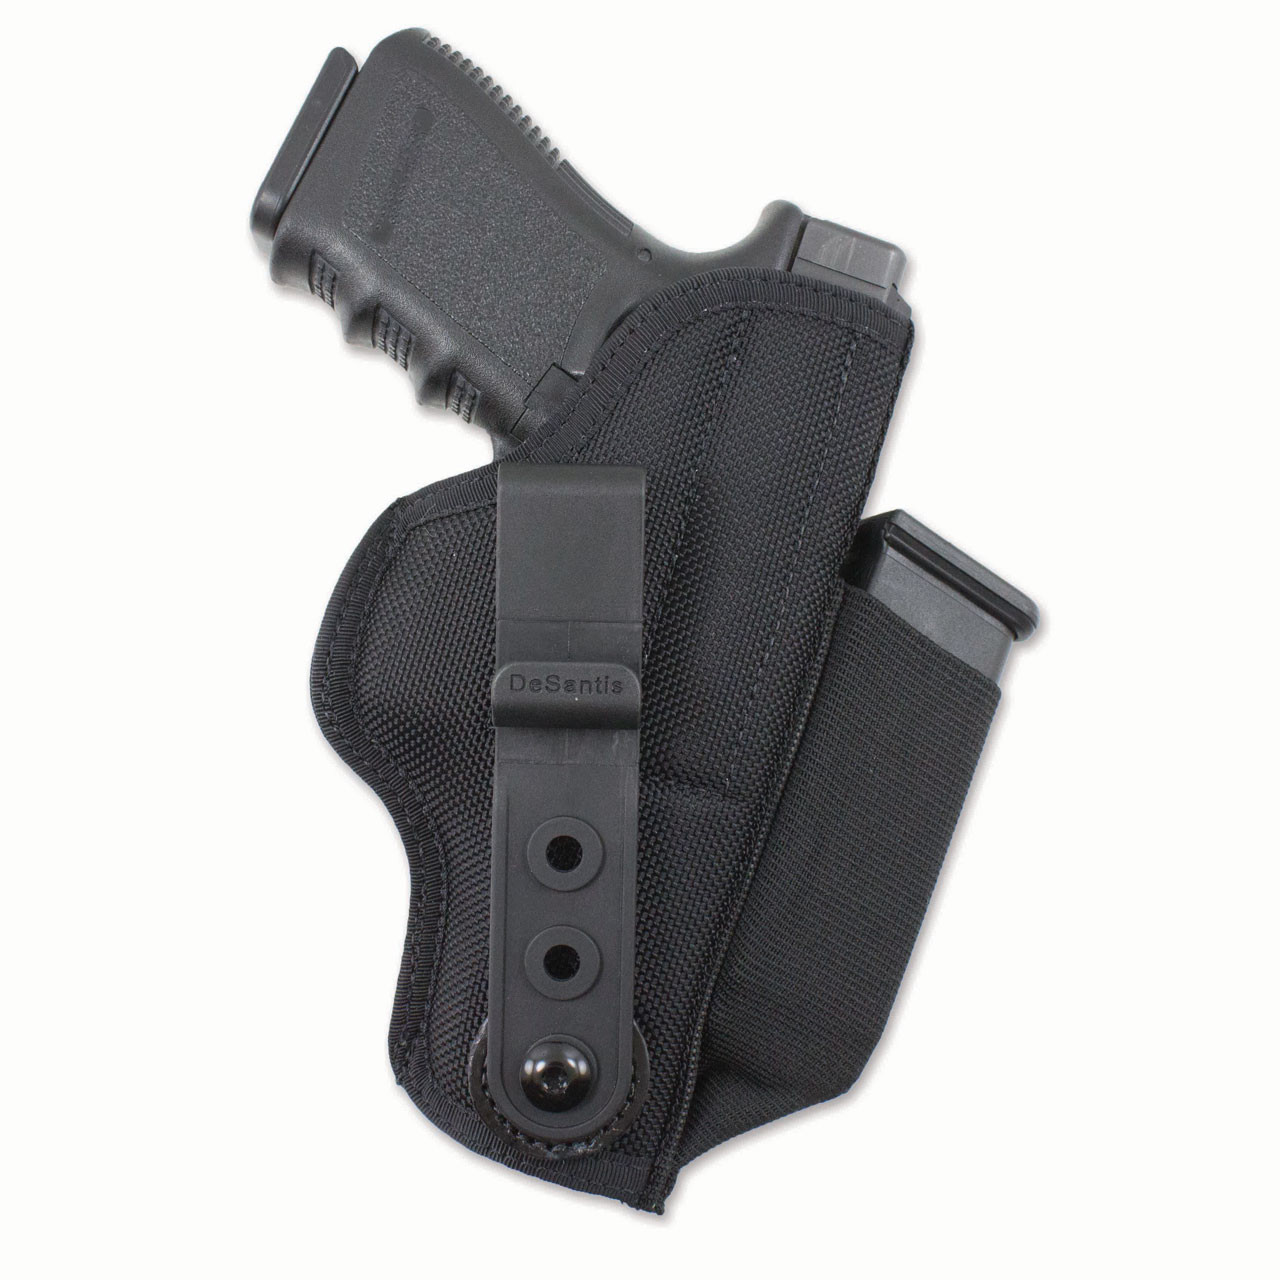 Details about   Leather Purse/Pocket HOLSTER for Smith & Wesson M&P9 Compact Made in USA 